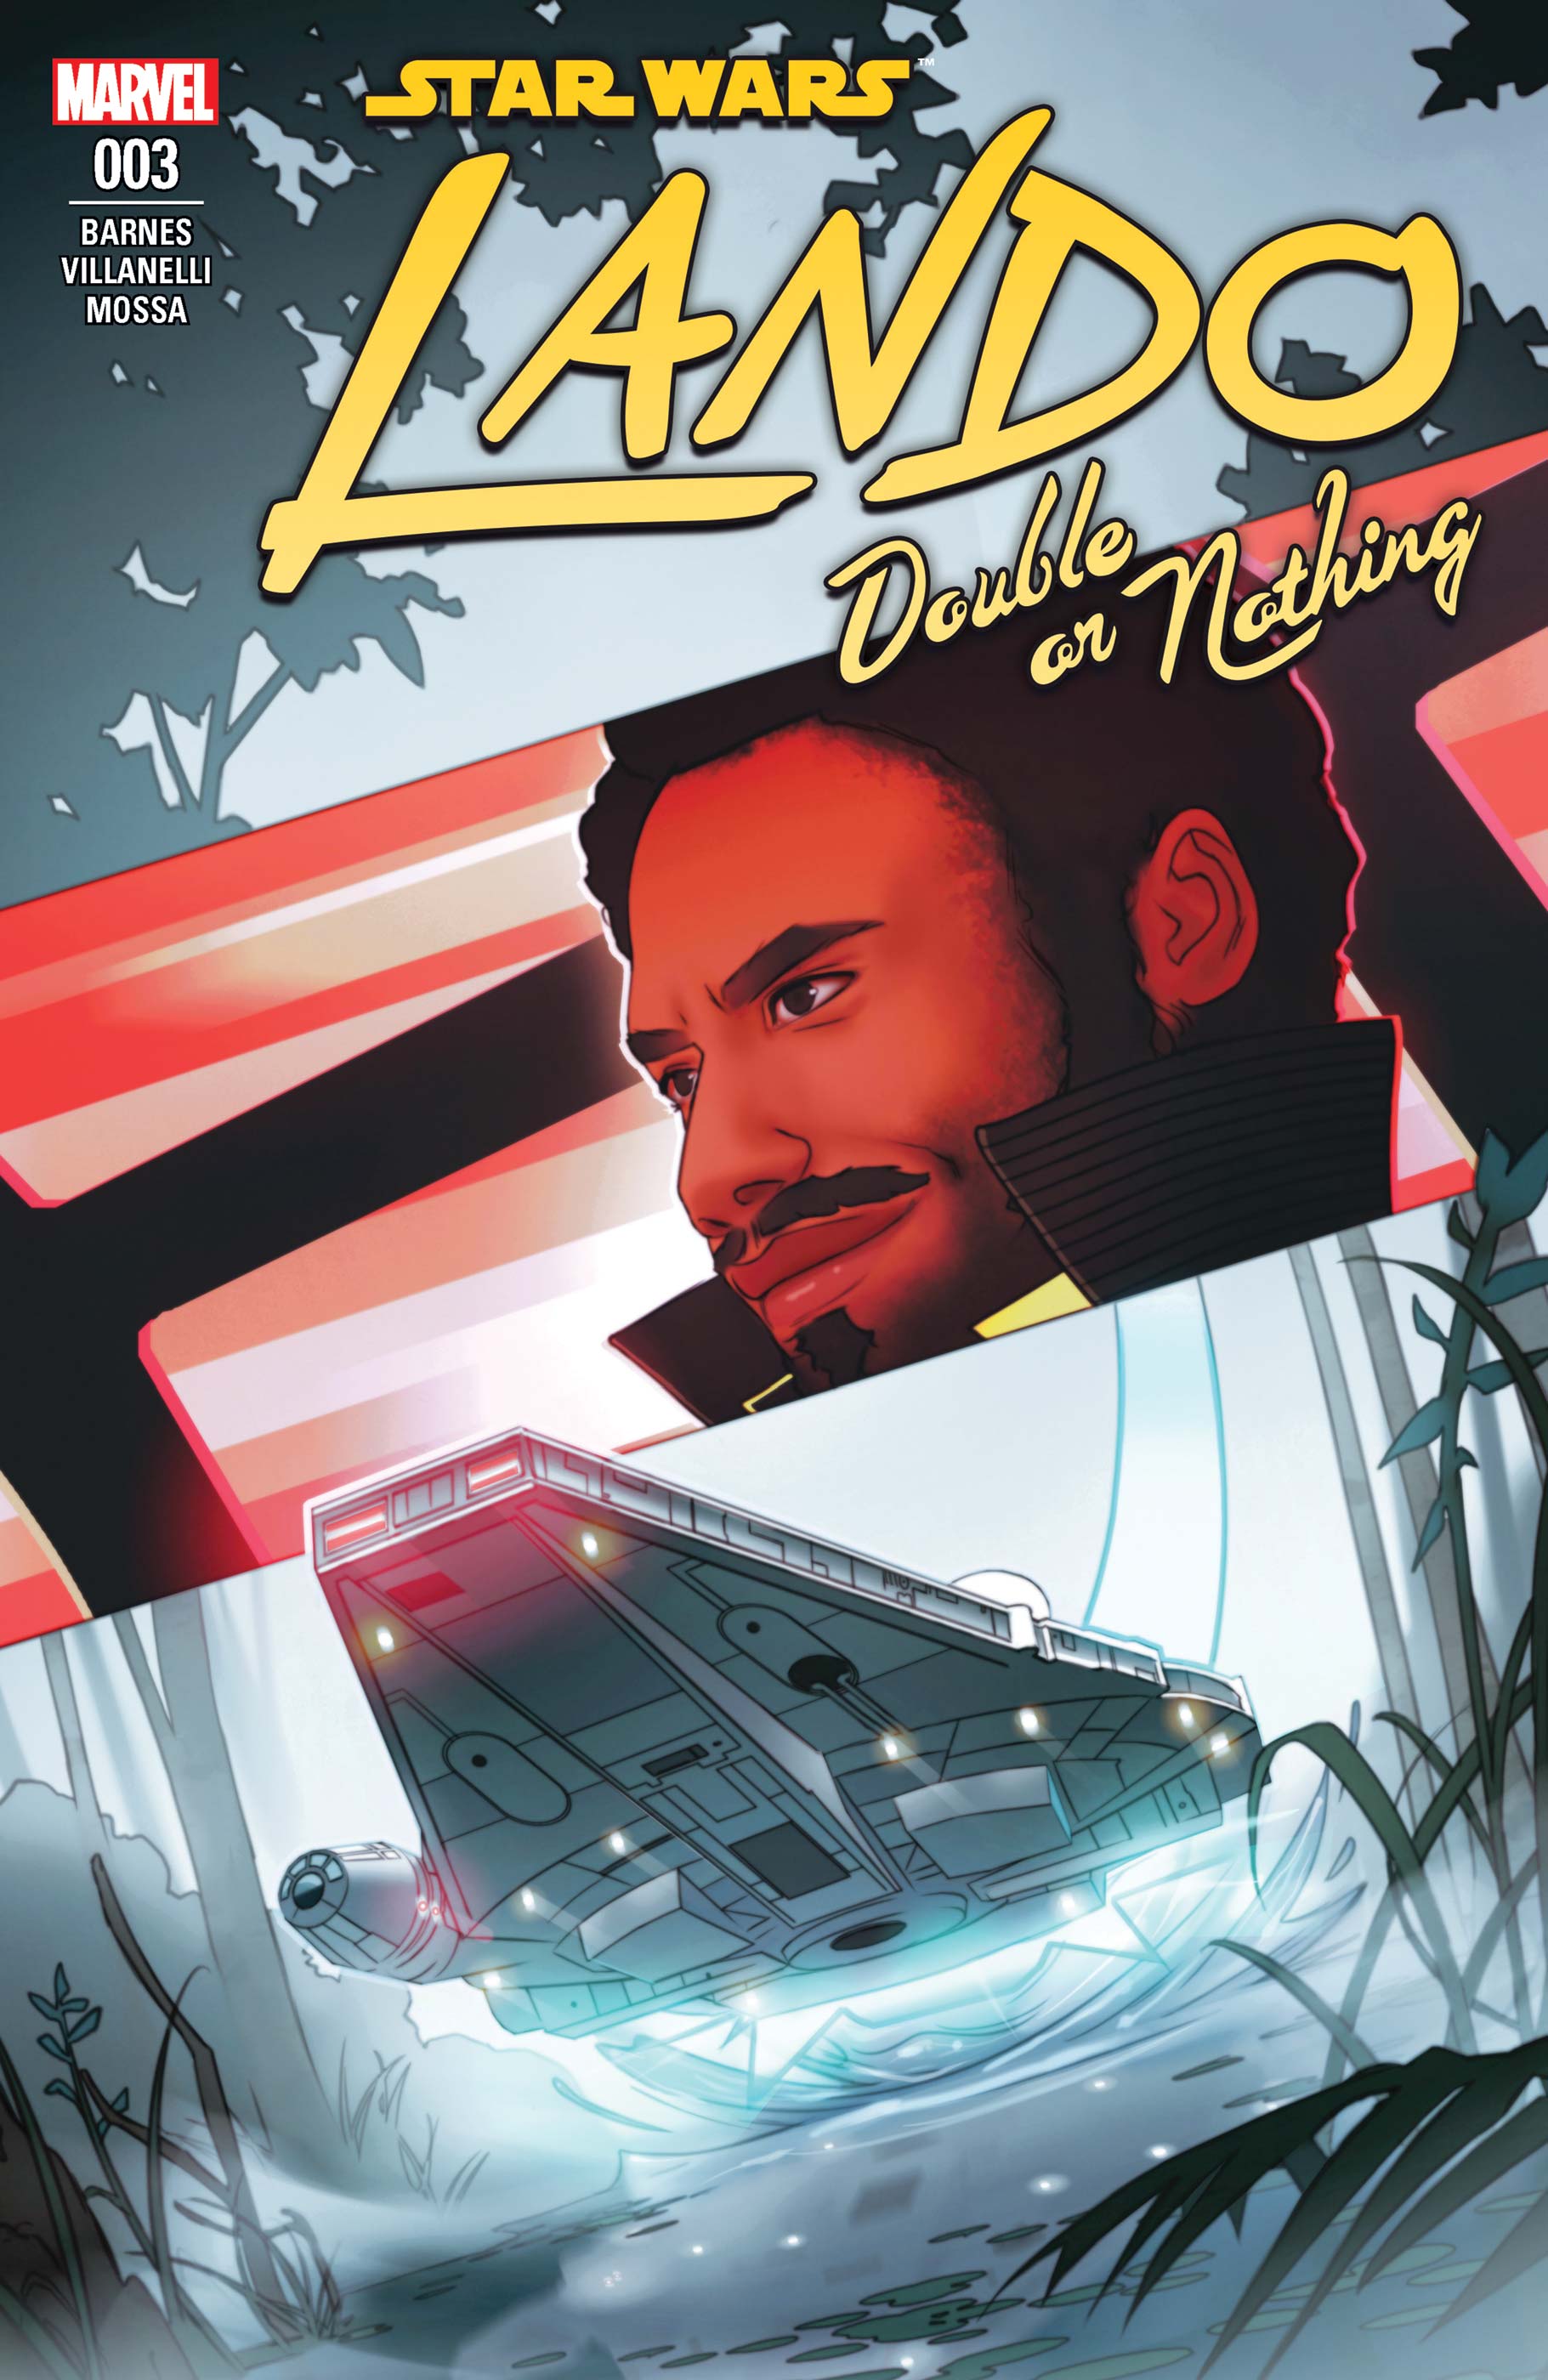 Star Wars: Lando - Double or Nothing (2018) #3